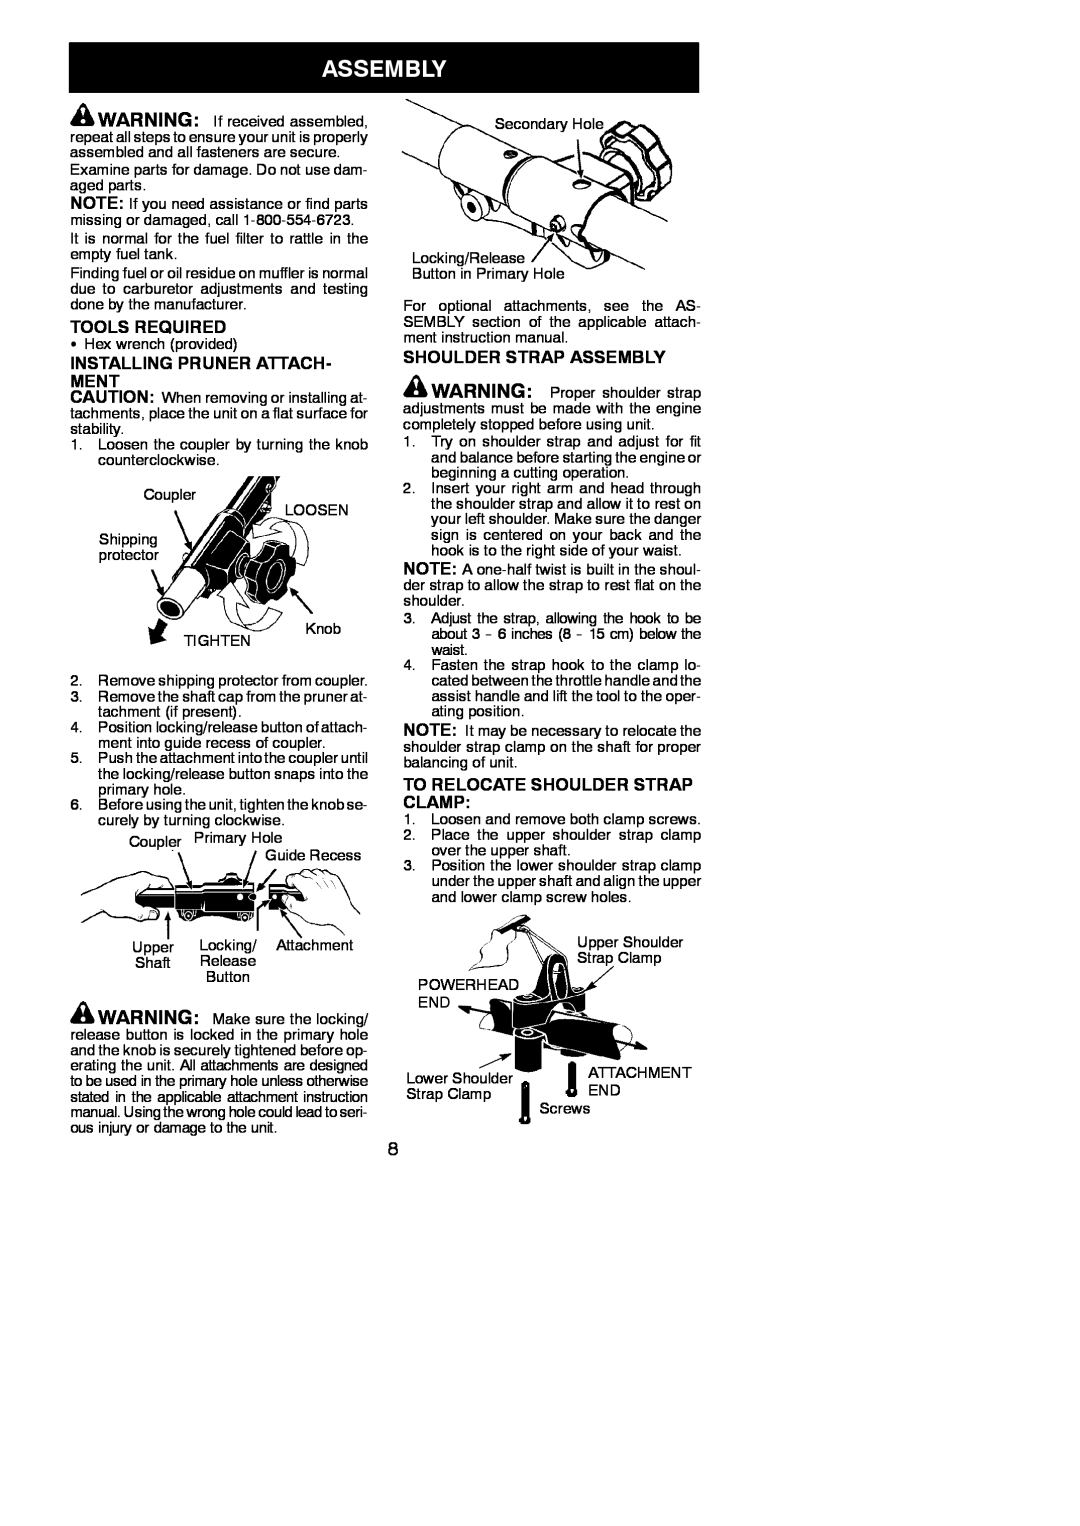 Poulan PP258TP instruction manual Tools Required, Installing Pruner Attach- Ment, Shoulder Strap Assembly 